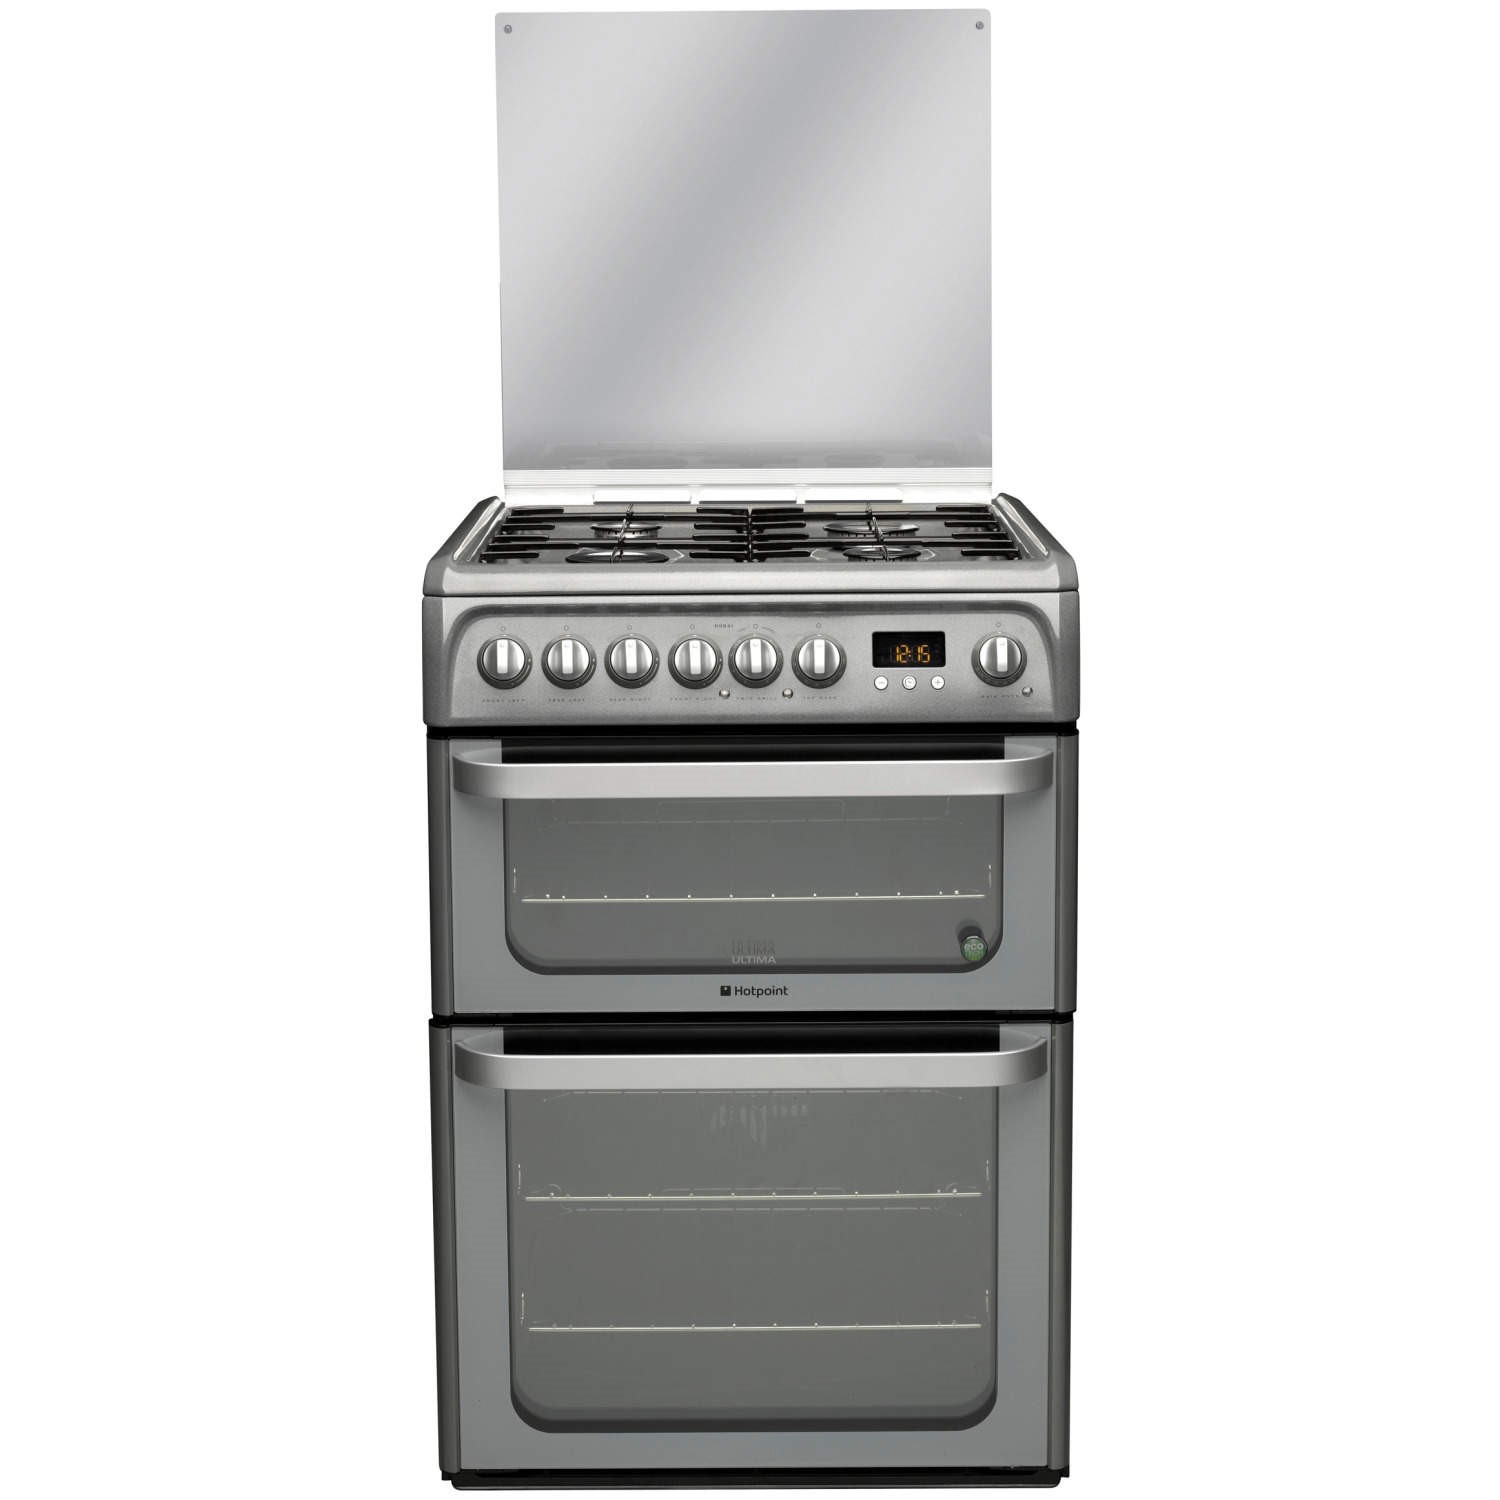 Hotpoint HUD61GS Dual Fuel Cooker, Graphite